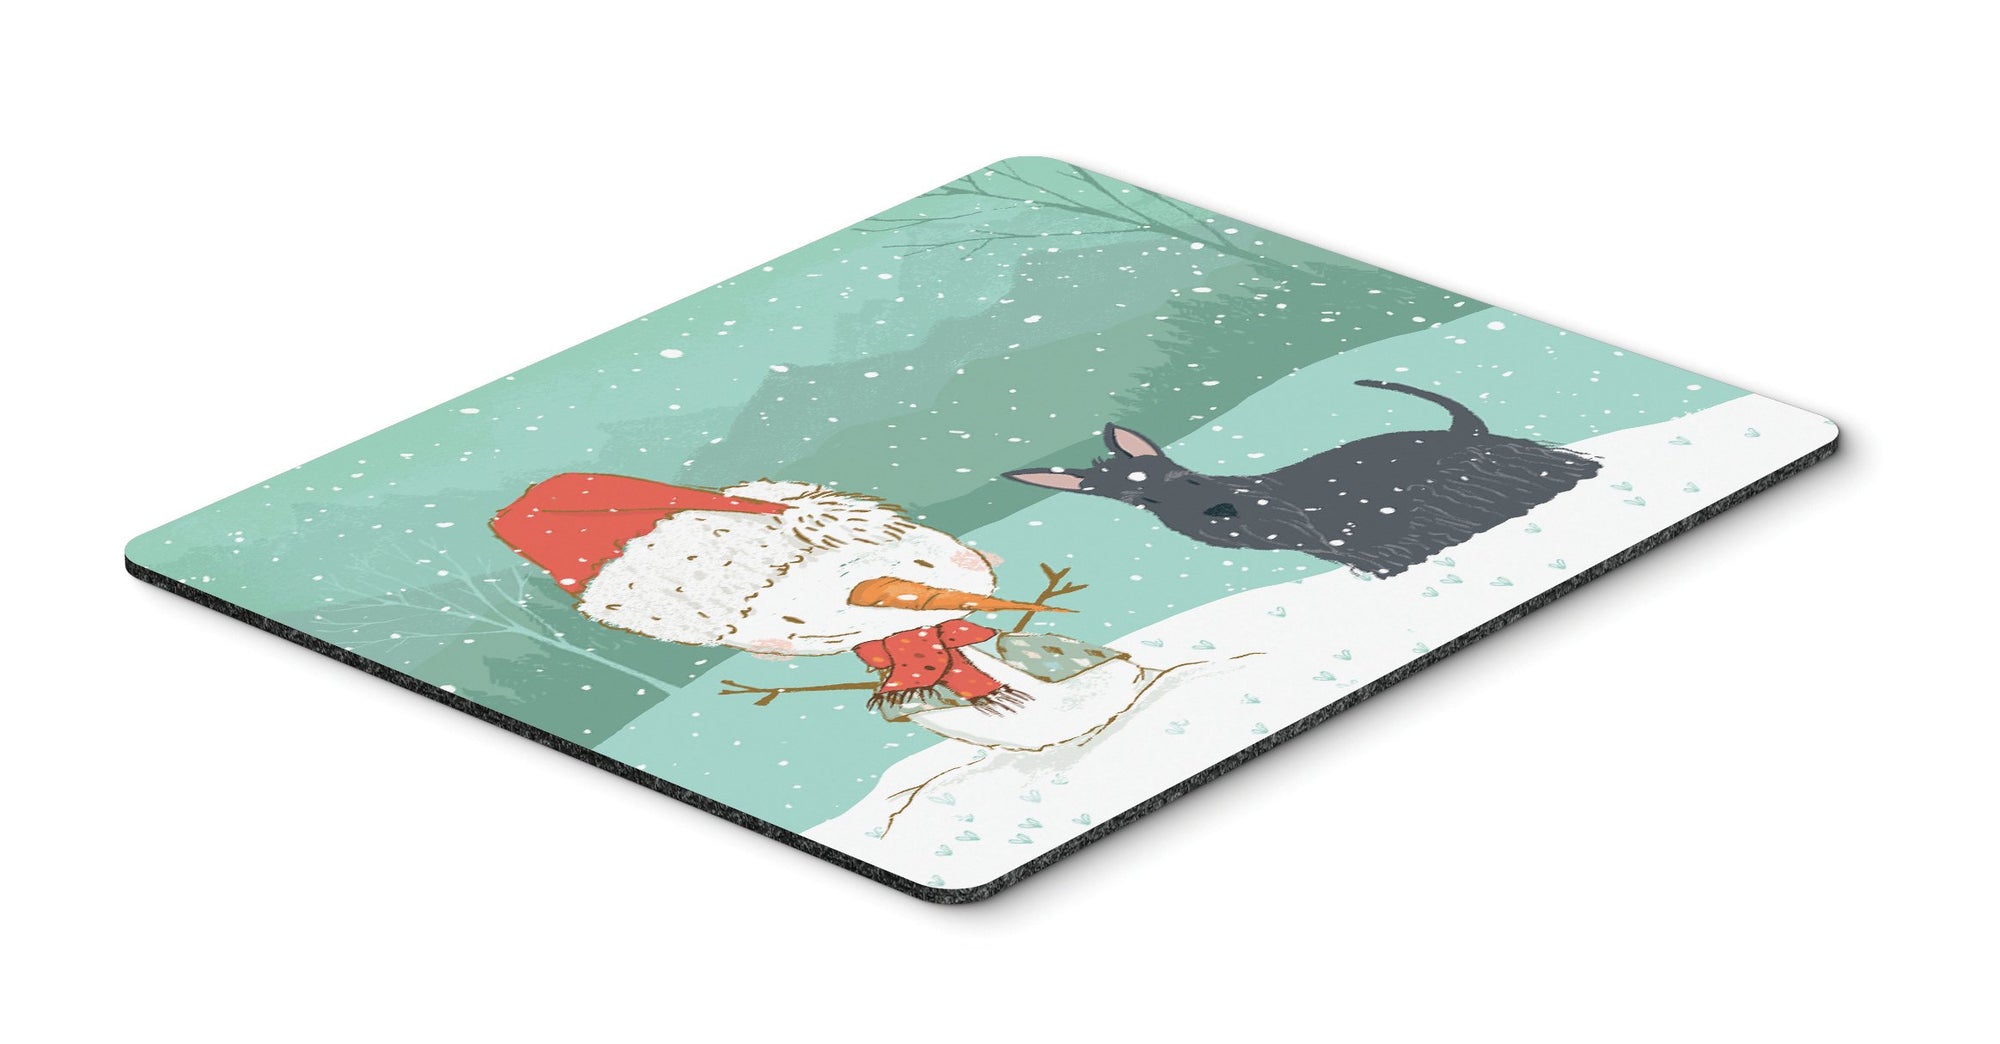 Scottish Terrier Snowman Christmas Mouse Pad, Hot Pad or Trivet CK2068MP by Caroline's Treasures